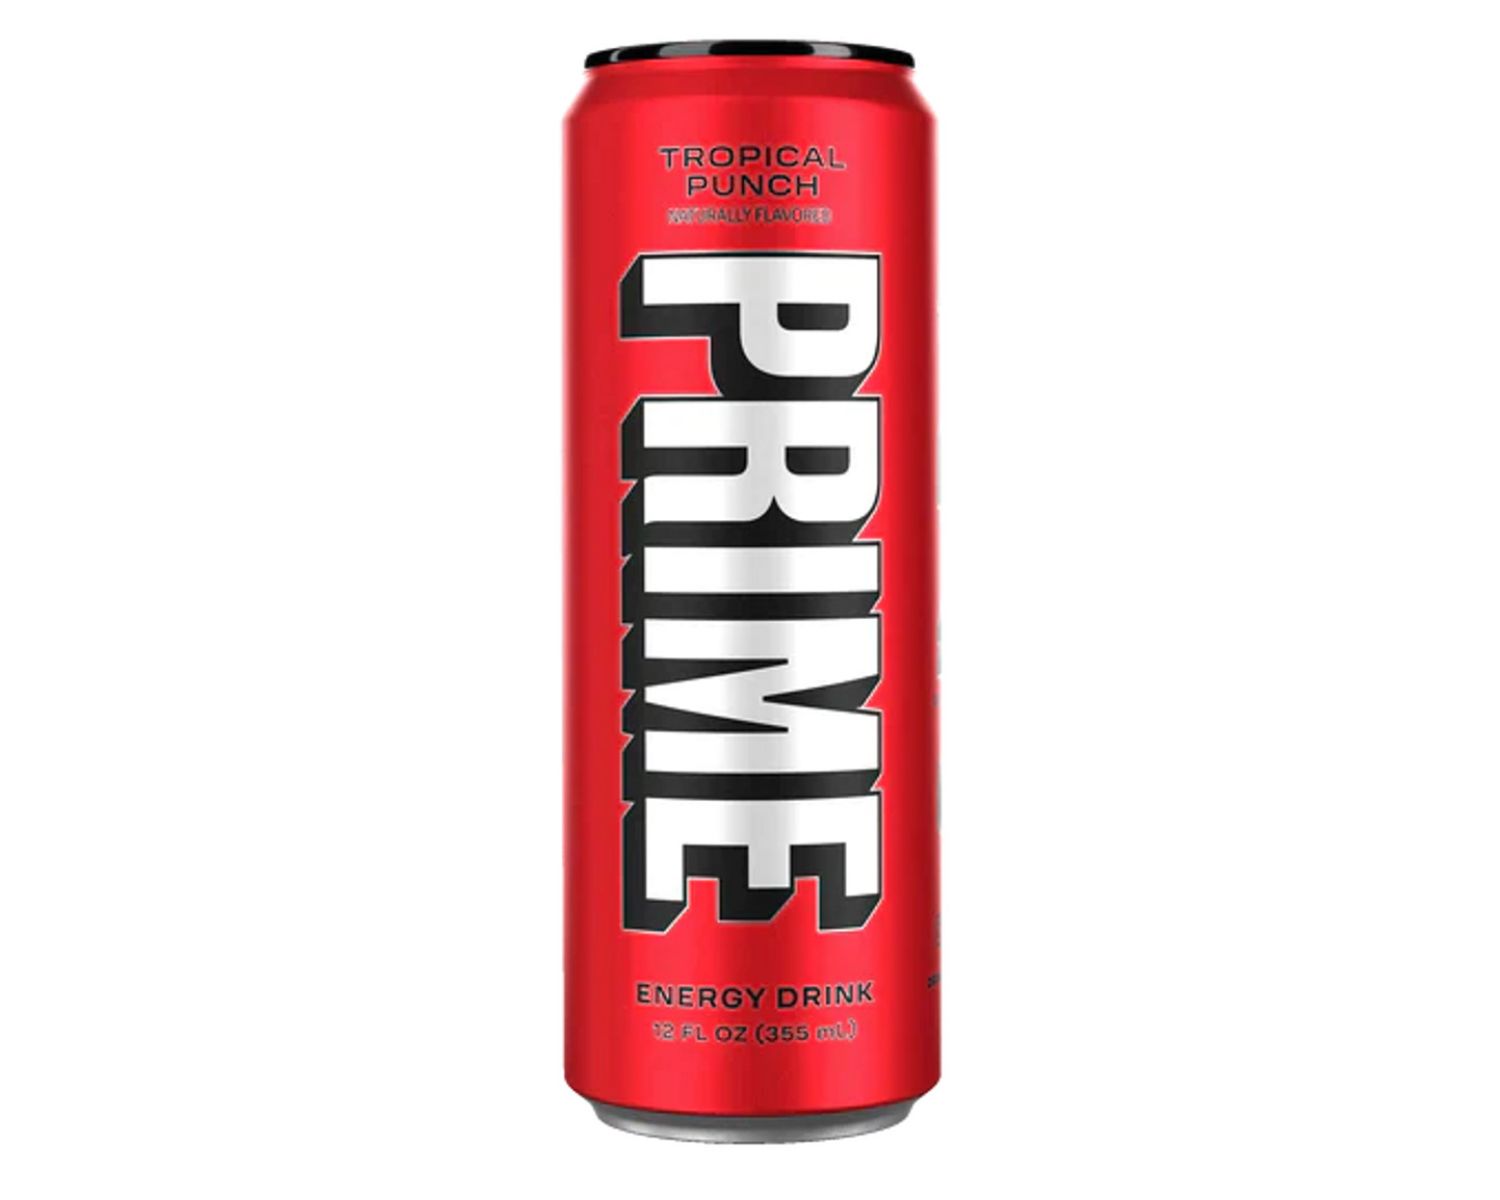 10-prime-energy-nutrition-facts